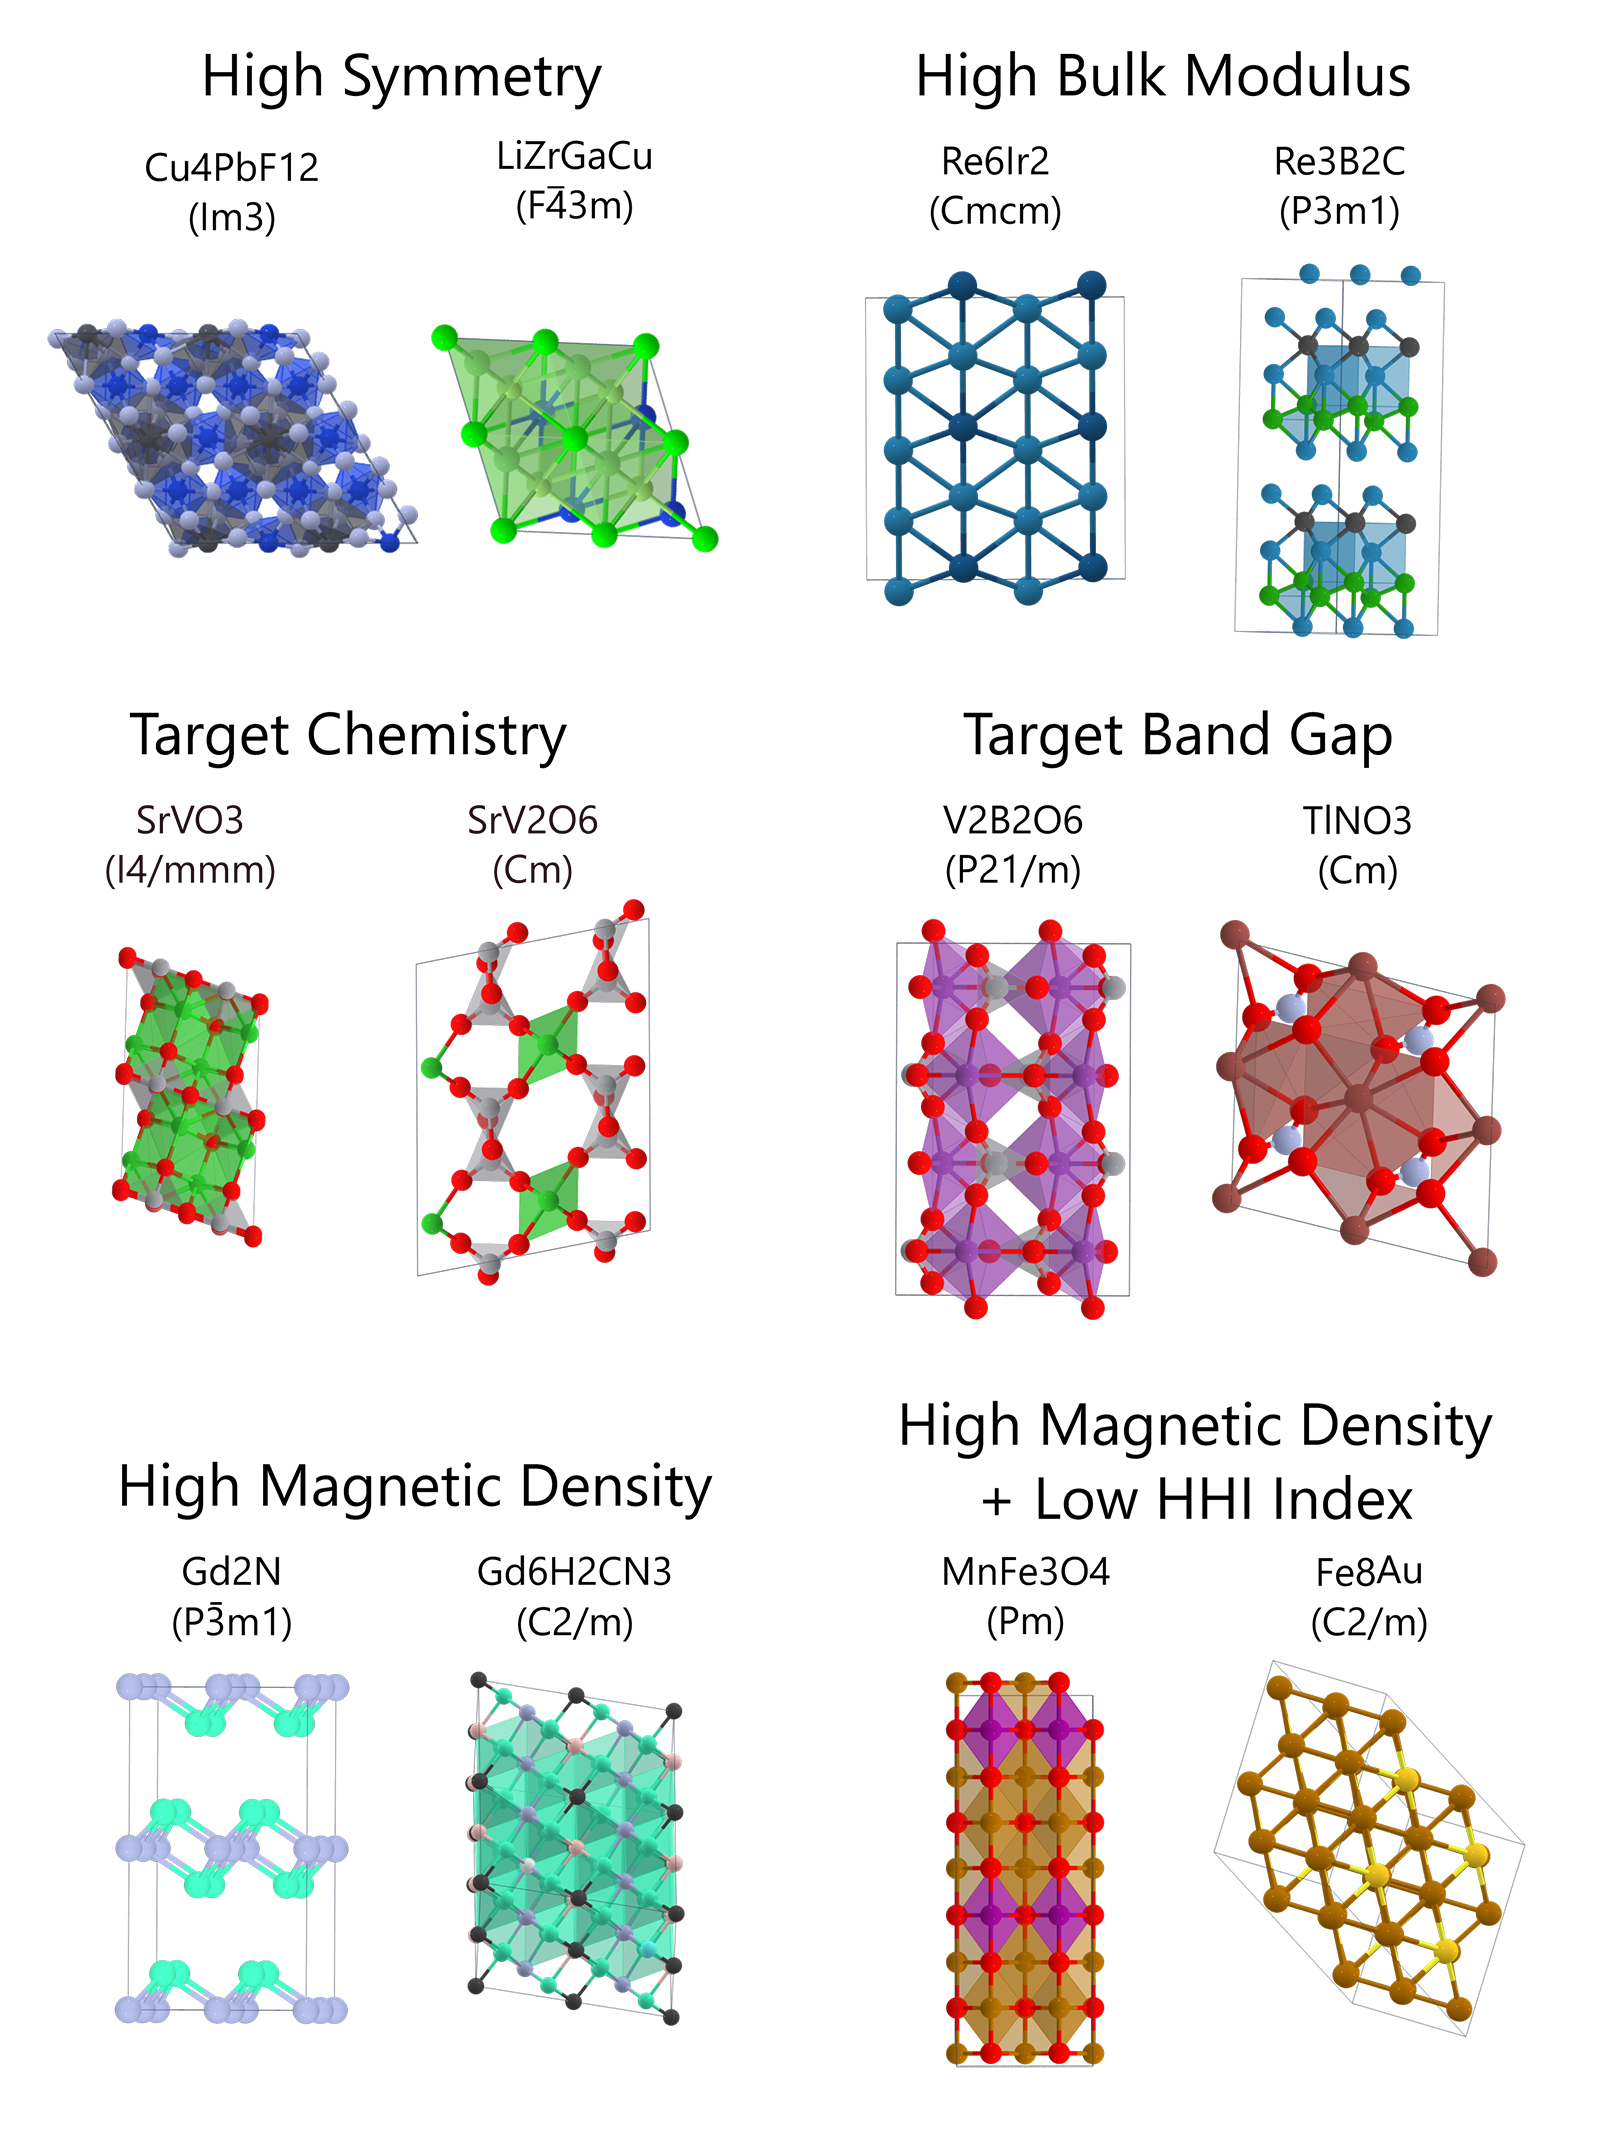 Figure 1 (alt text) 

This figure displays six pairs of crystalline structures, two for each property constrain. The property constraints are, top to bottom and left to right, high space group symmetry, high bulk modulus, target chemical system, target band gap, high magnetic density, combined high magnetic density and low HHI index.